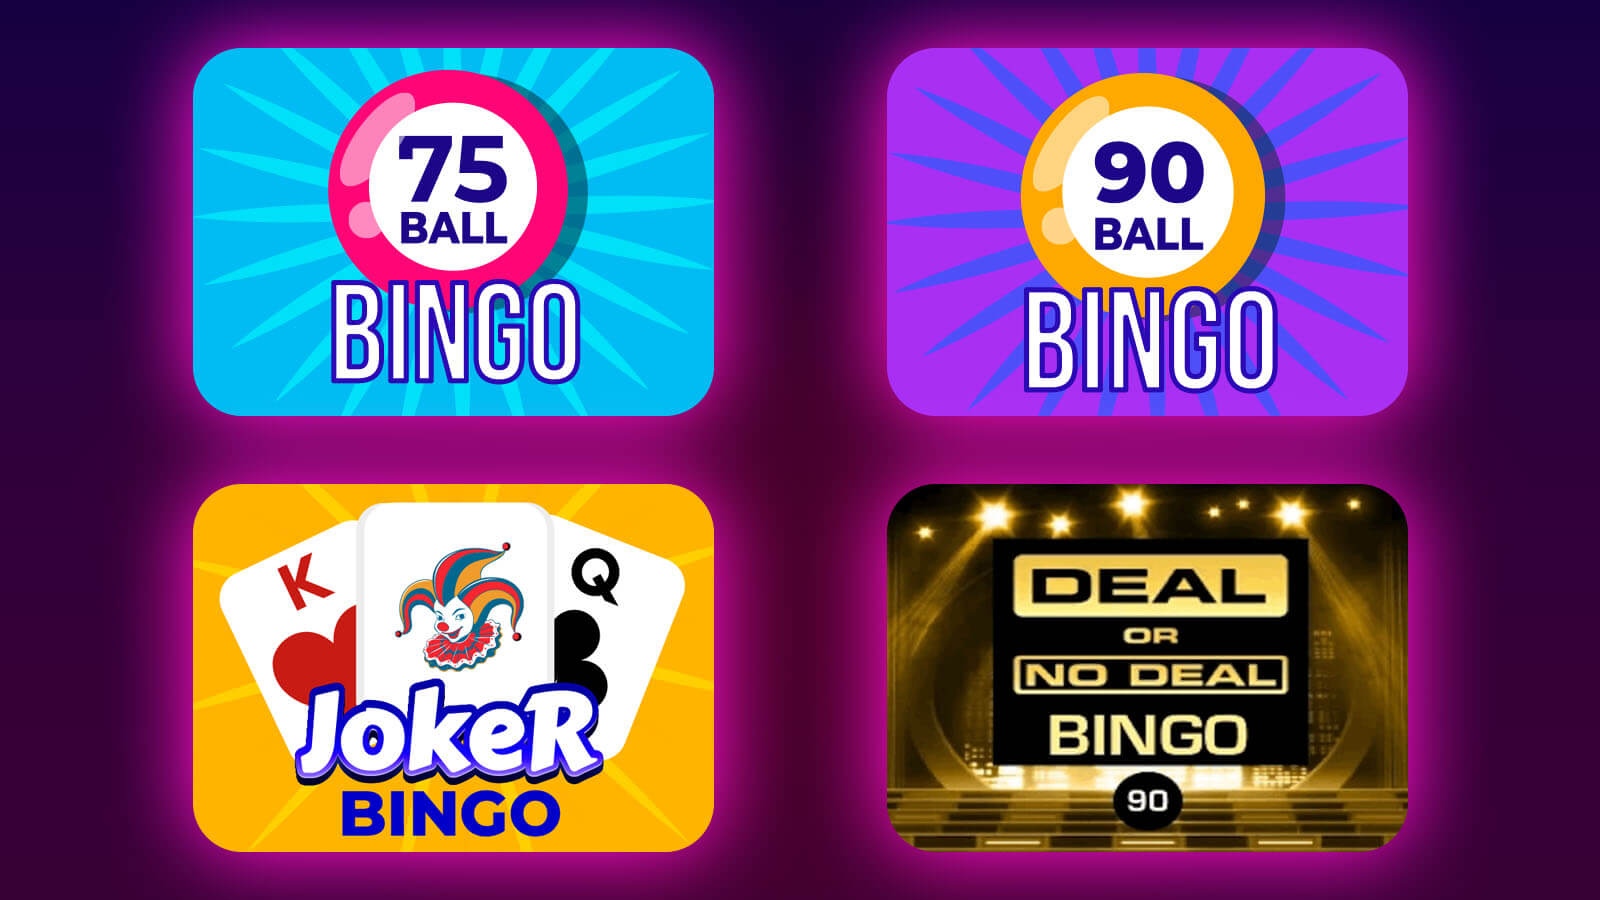 Most popular types and variations of bingo games